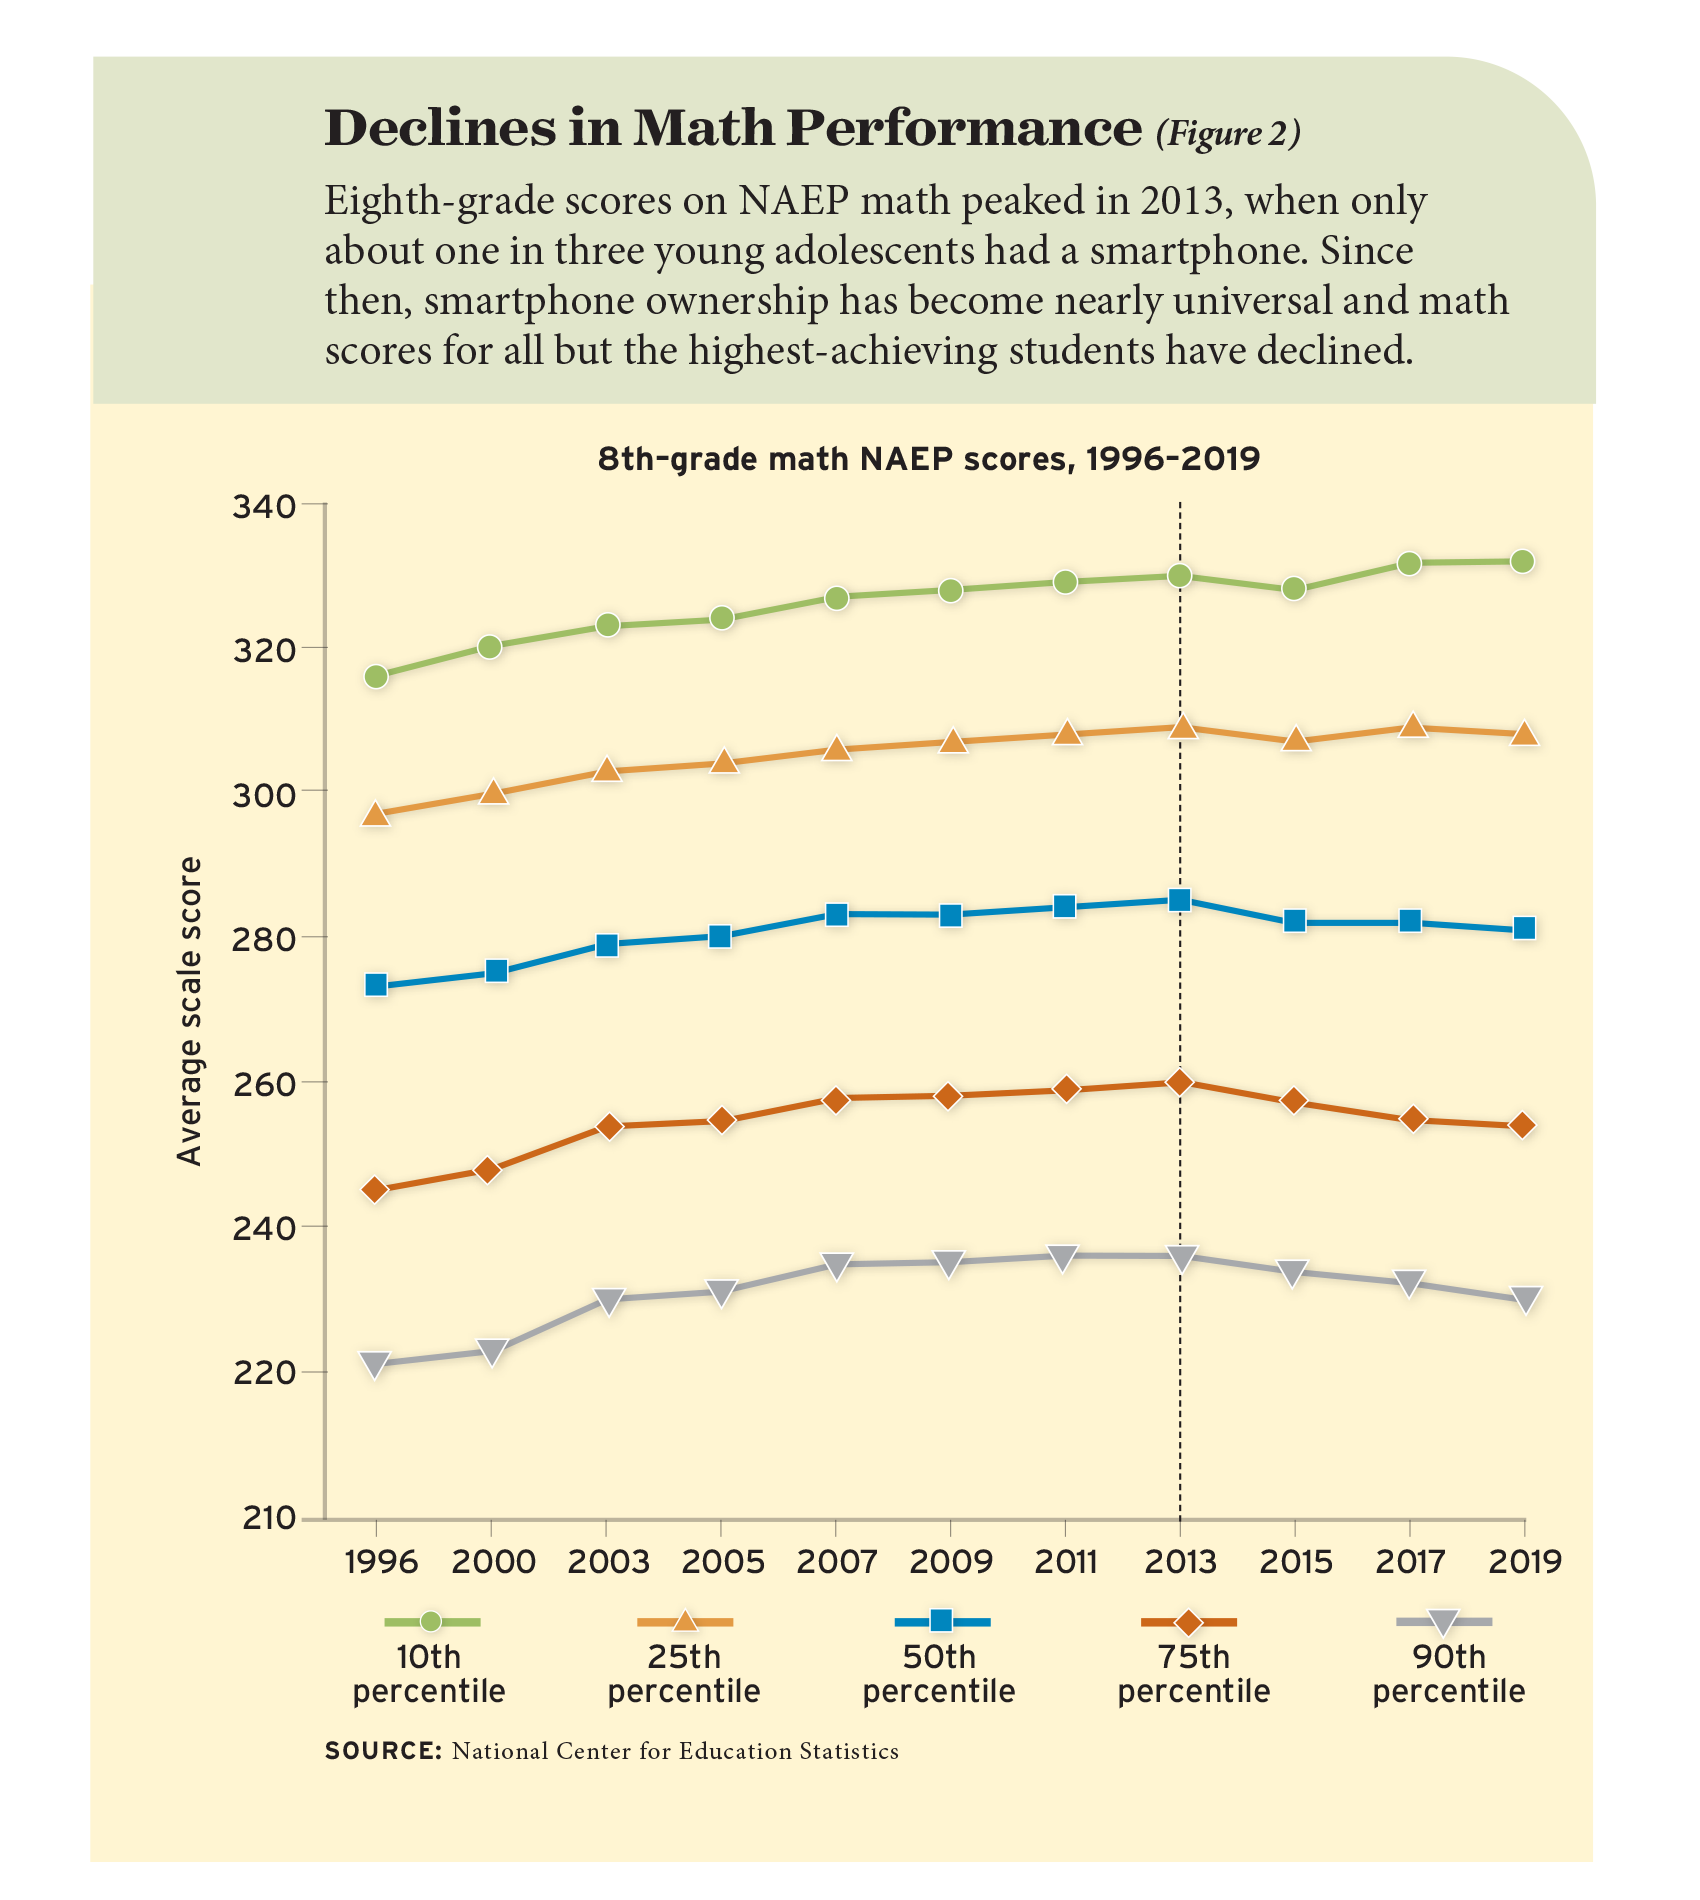 Figure 2: Declines in Math Performance